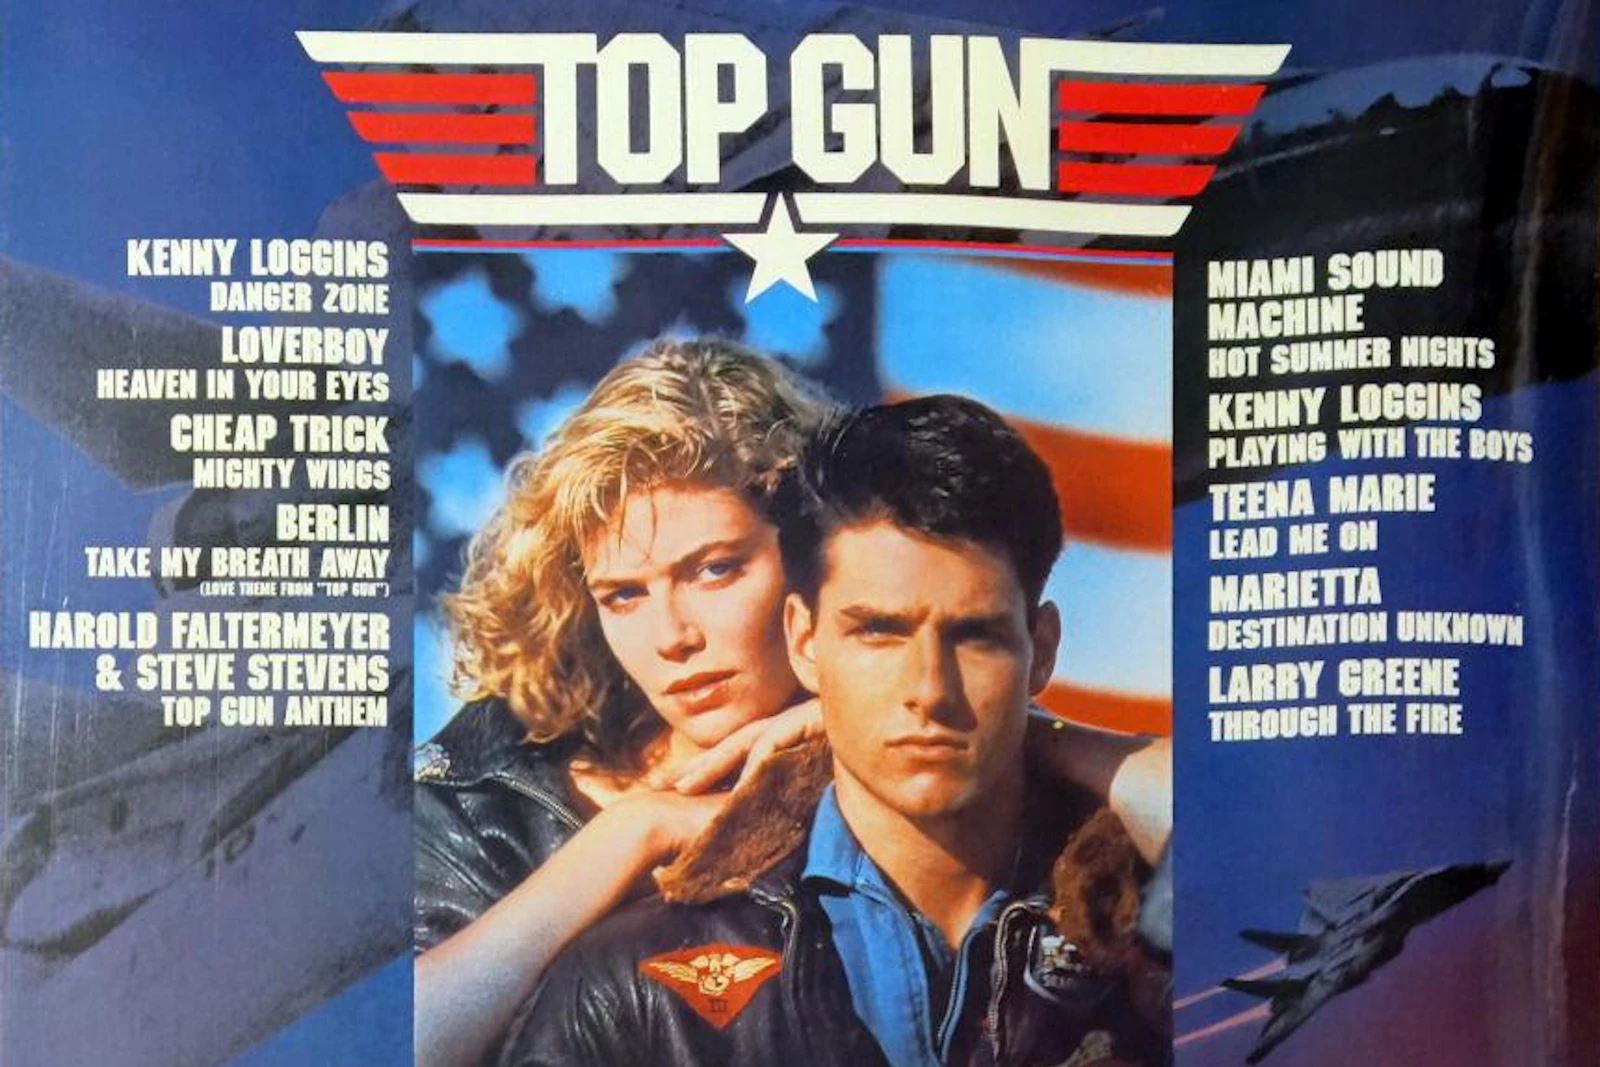 Top Gun Porn Moves - Why 'Top Gun' Features That 'Soft Porn' Volleyball Scene